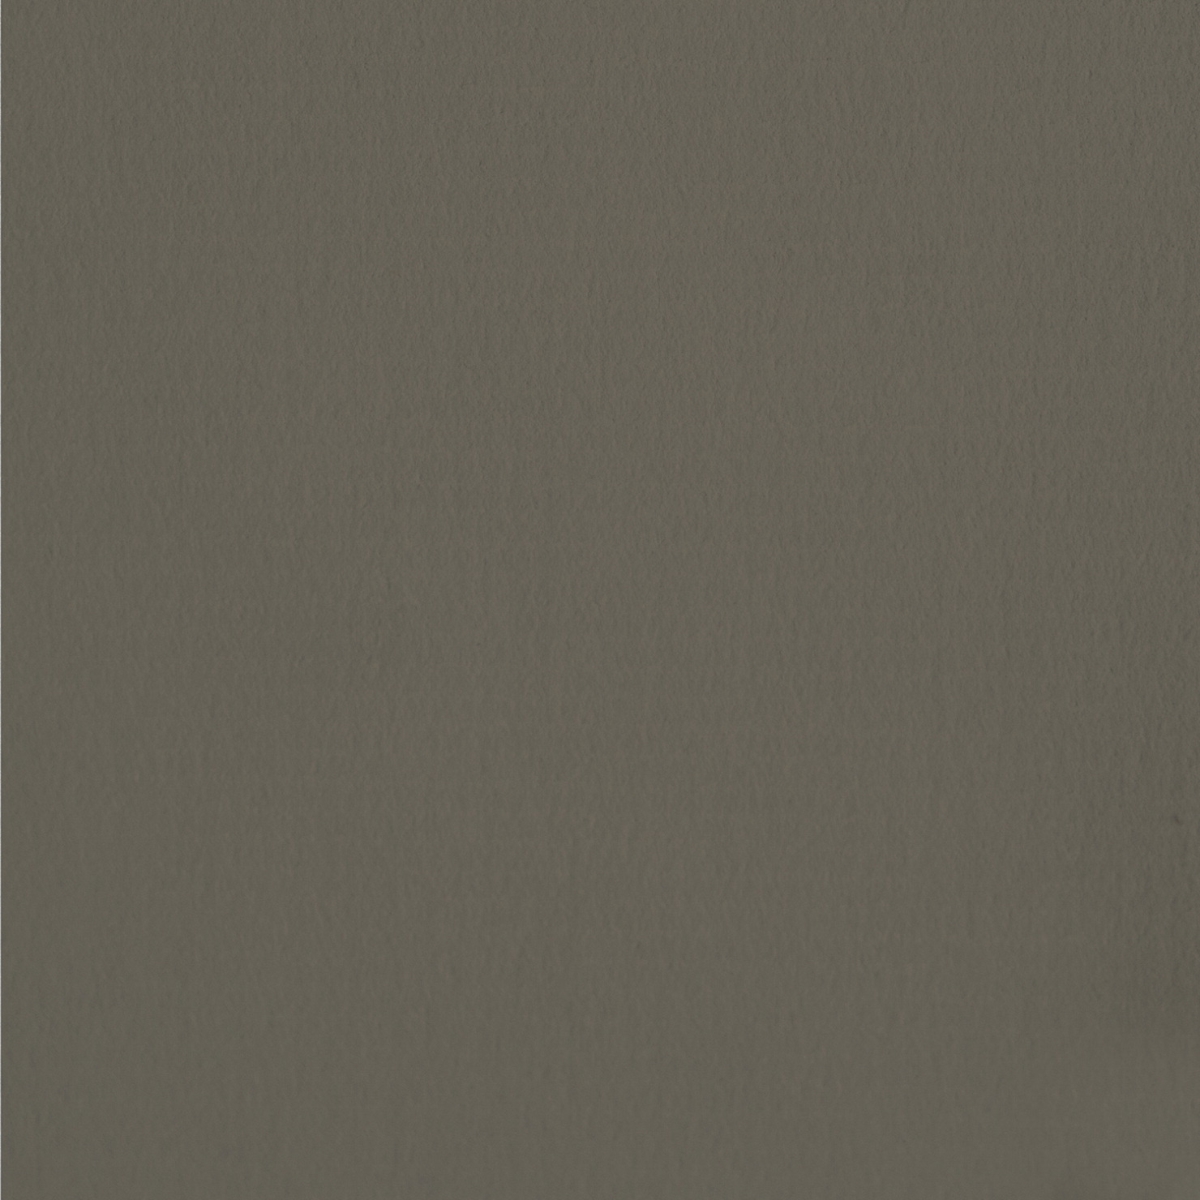 2021627 25 X 19 In. 500 Series Charcoal Paper With 25 Sheets, Charcoal Gray - 64 Lbs